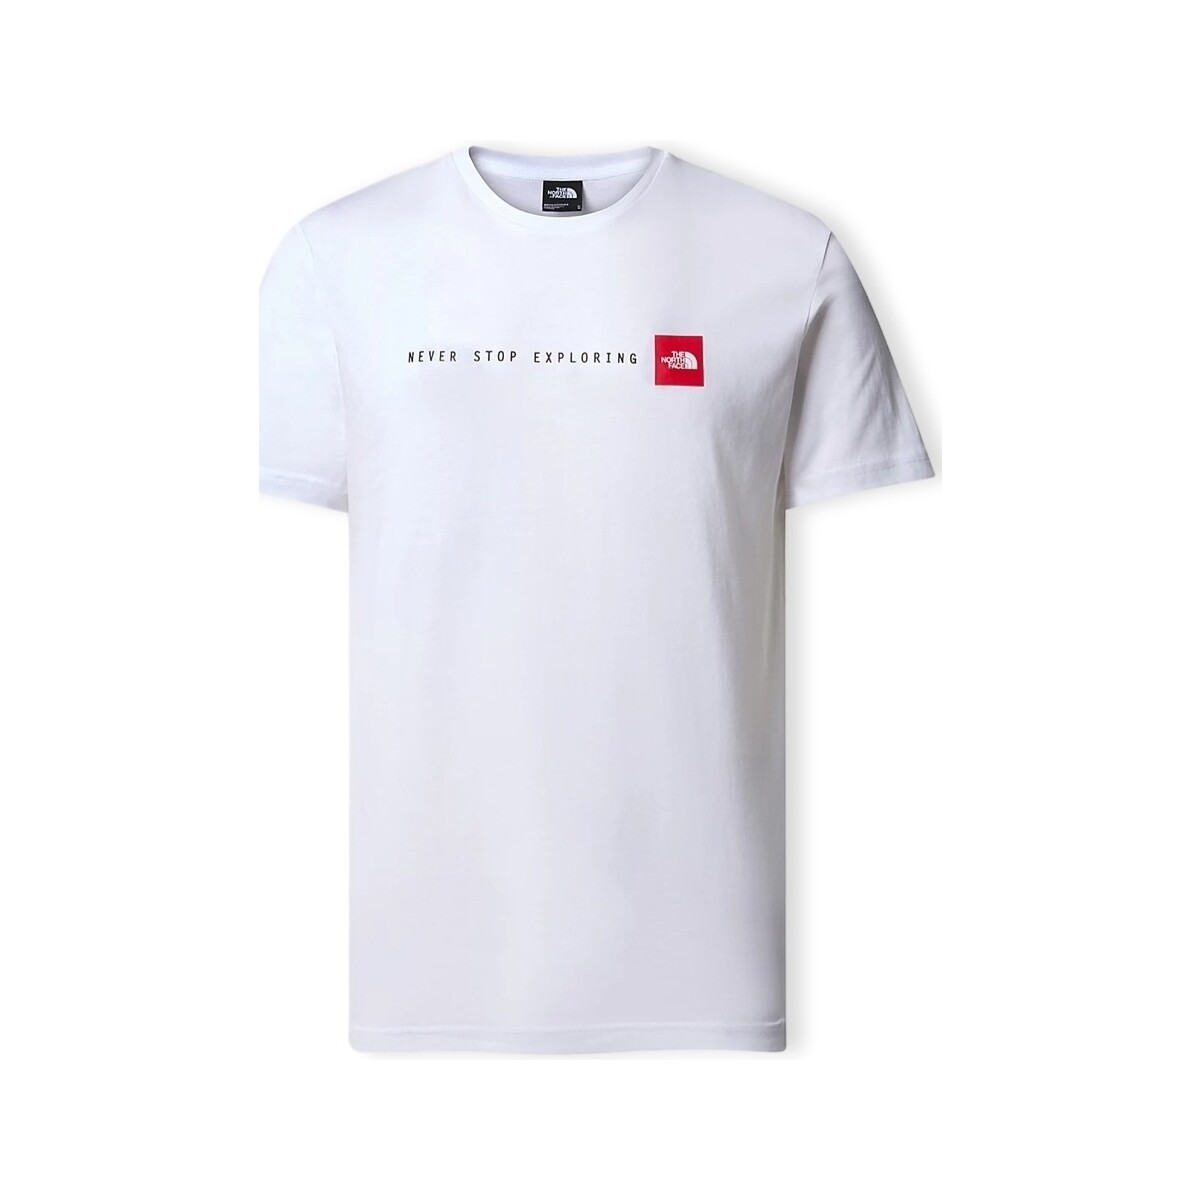 Vêtements Homme T-shirts & Polos The North Face T-Shirt Never Stop Exploring - White Blanc